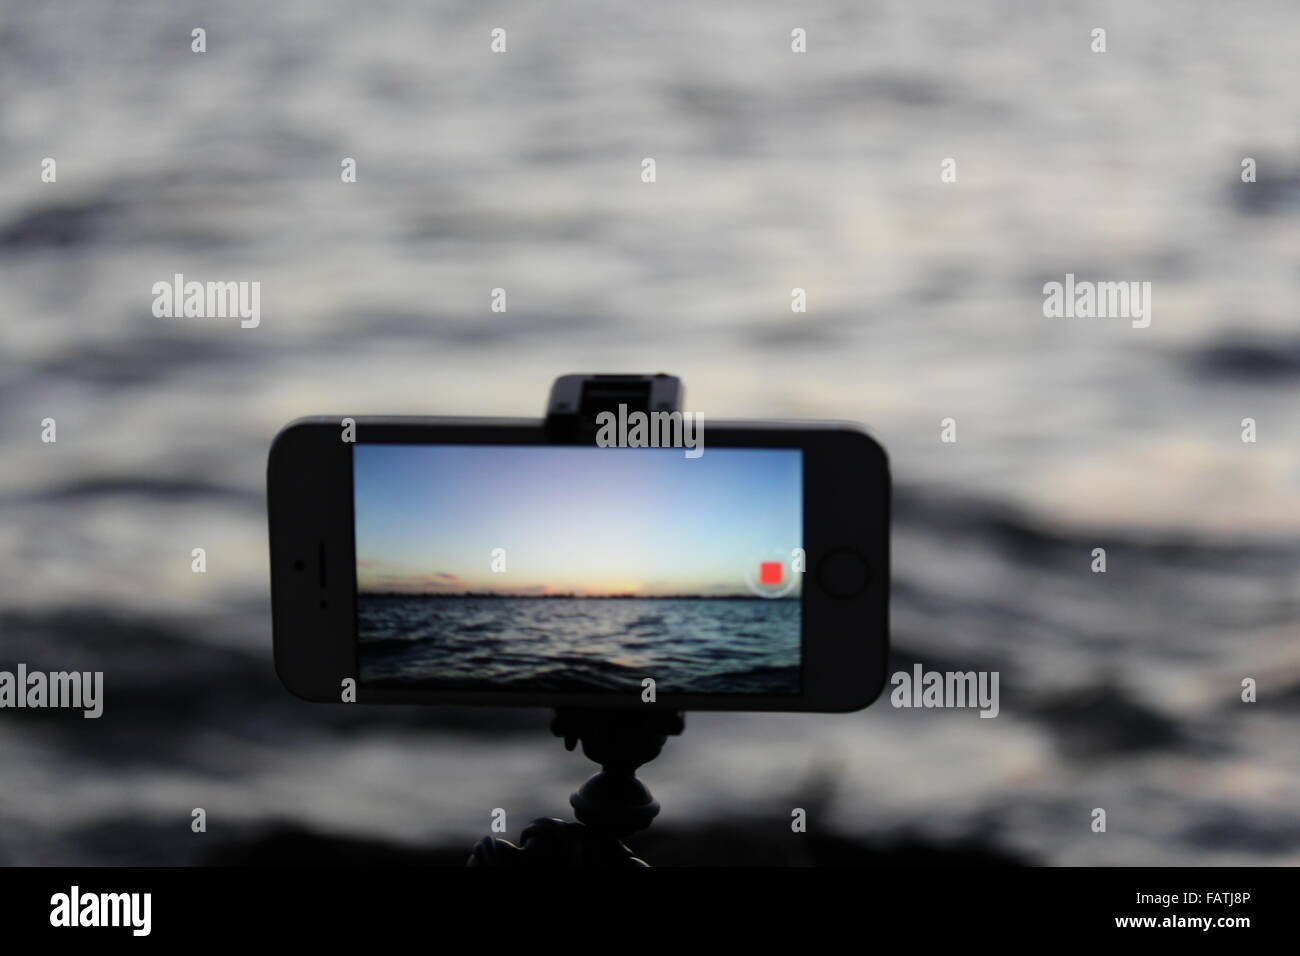 iPhone taking a time lapse Stock Photo